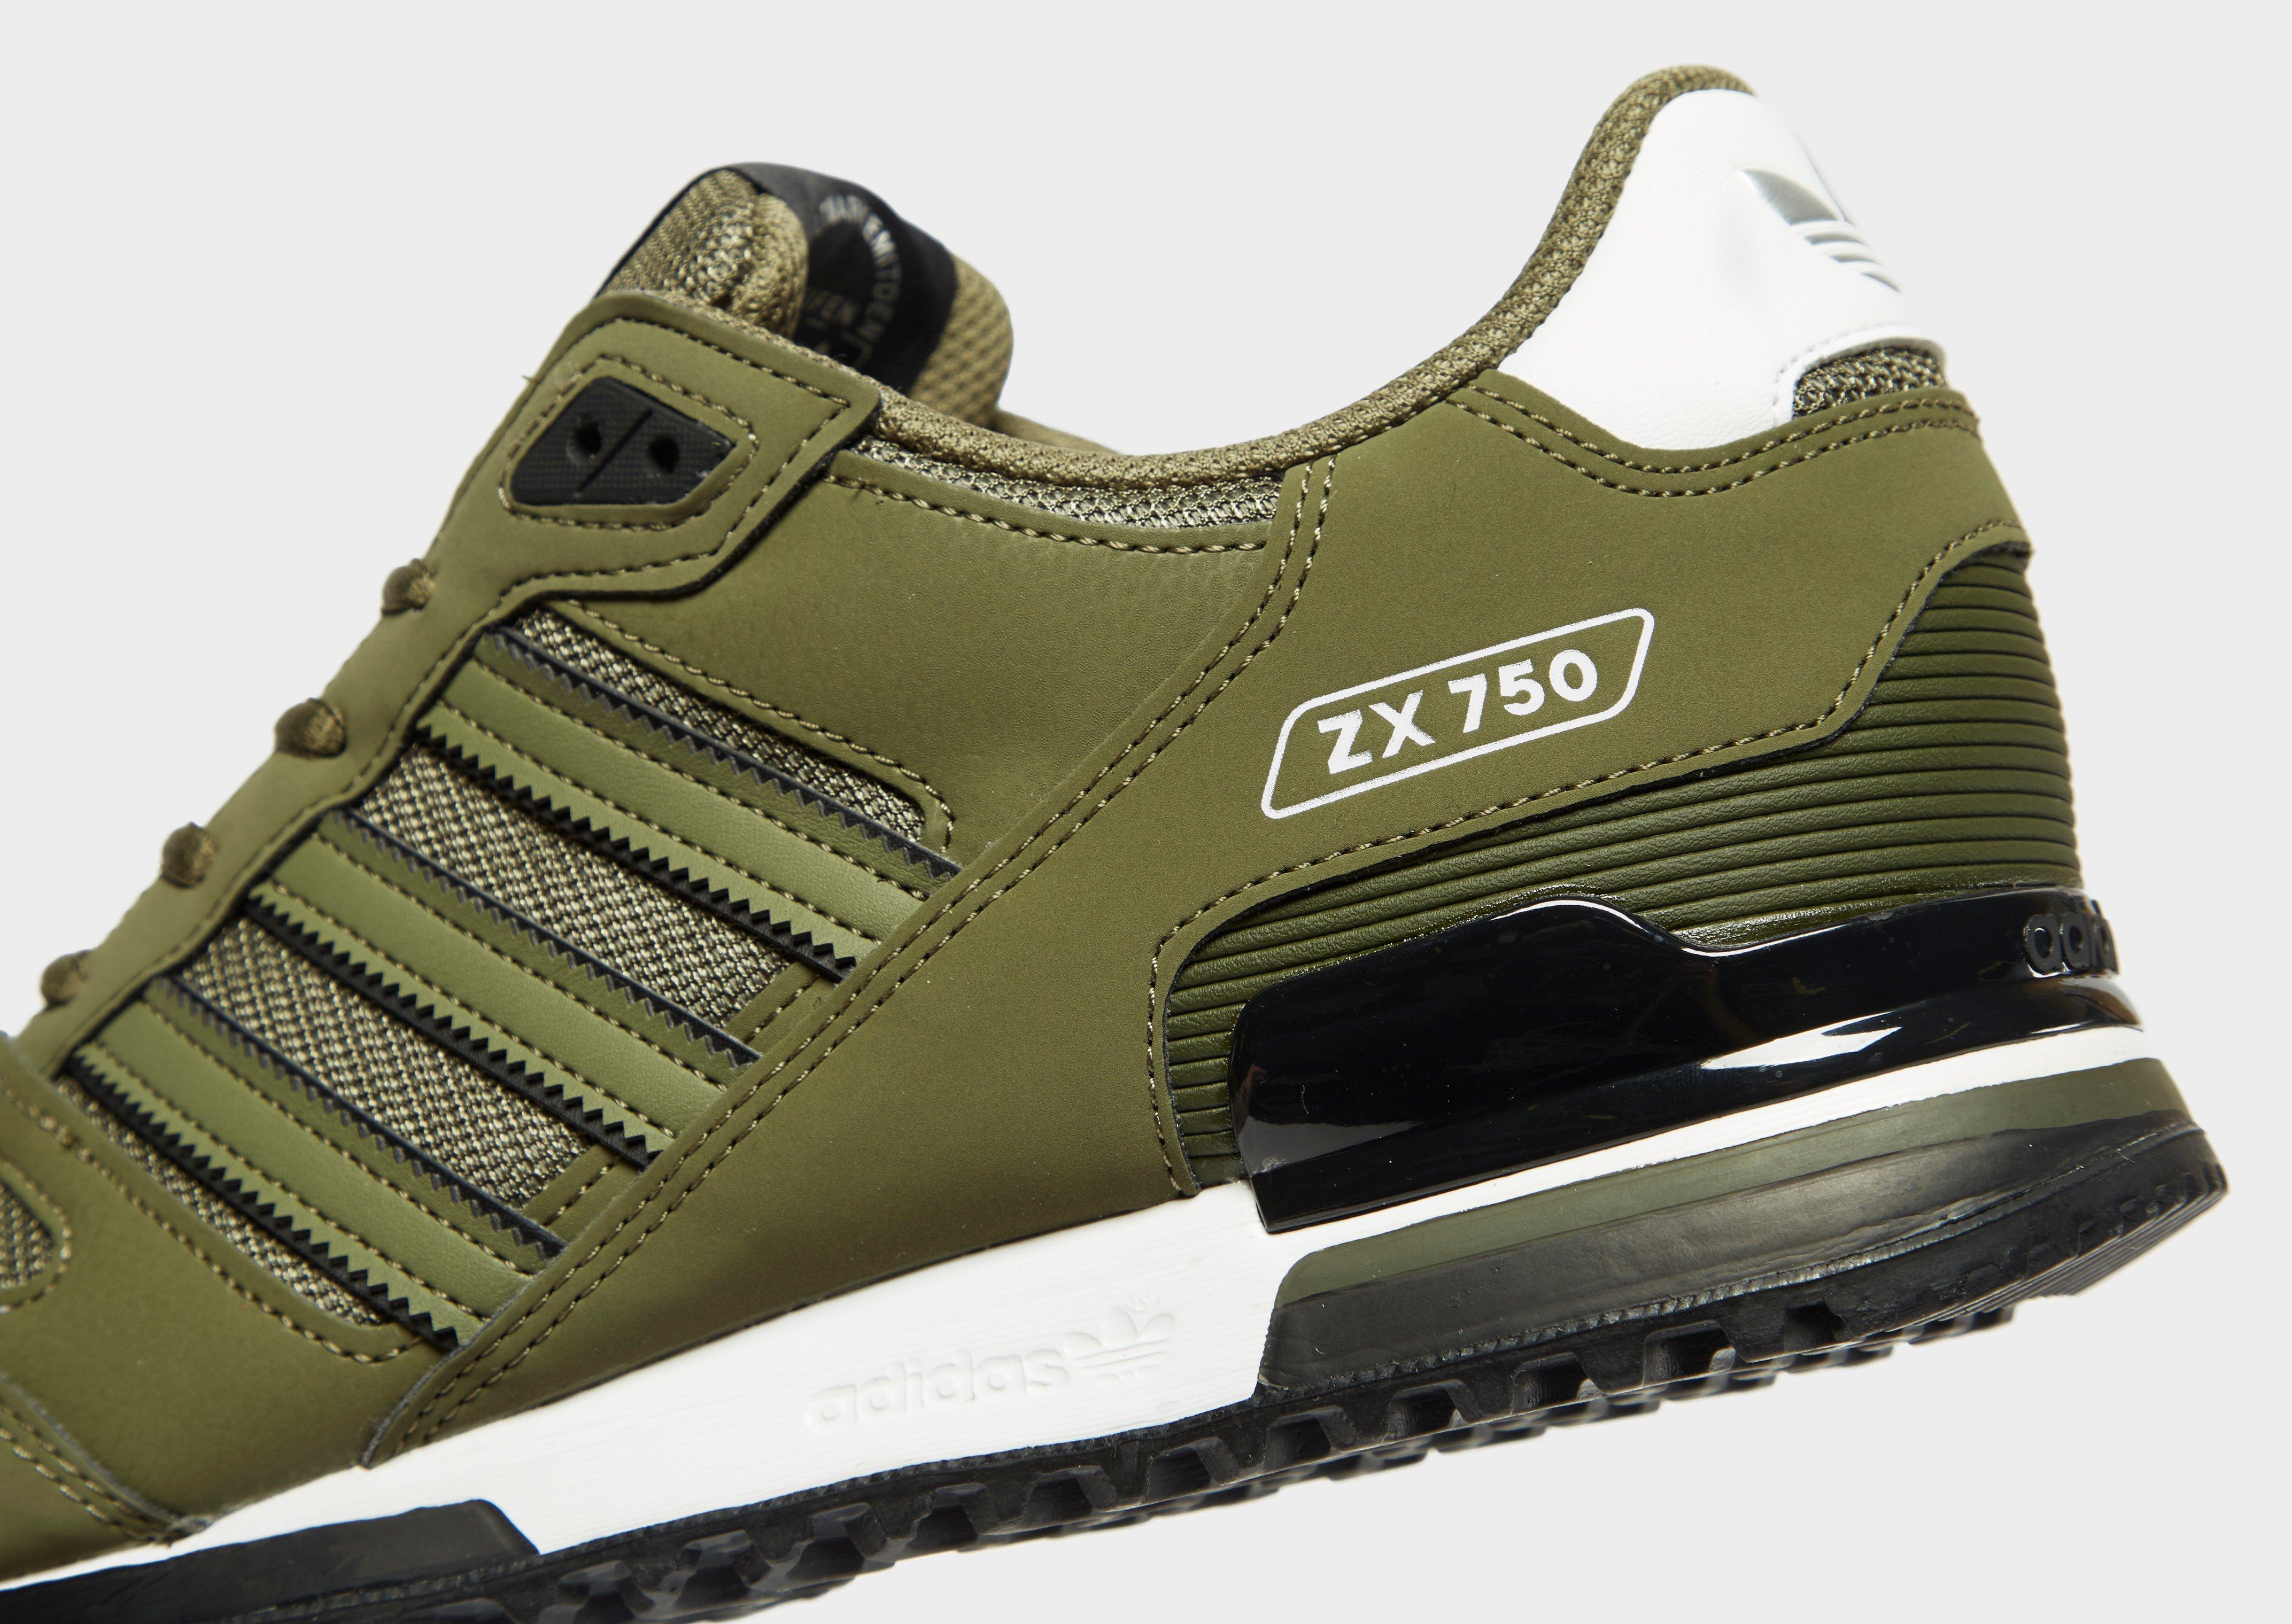 Tropical Motel embotellamiento Adidas Zx 750 Verdes Cheapest Prices, 48% OFF | gioithieuxe.vn